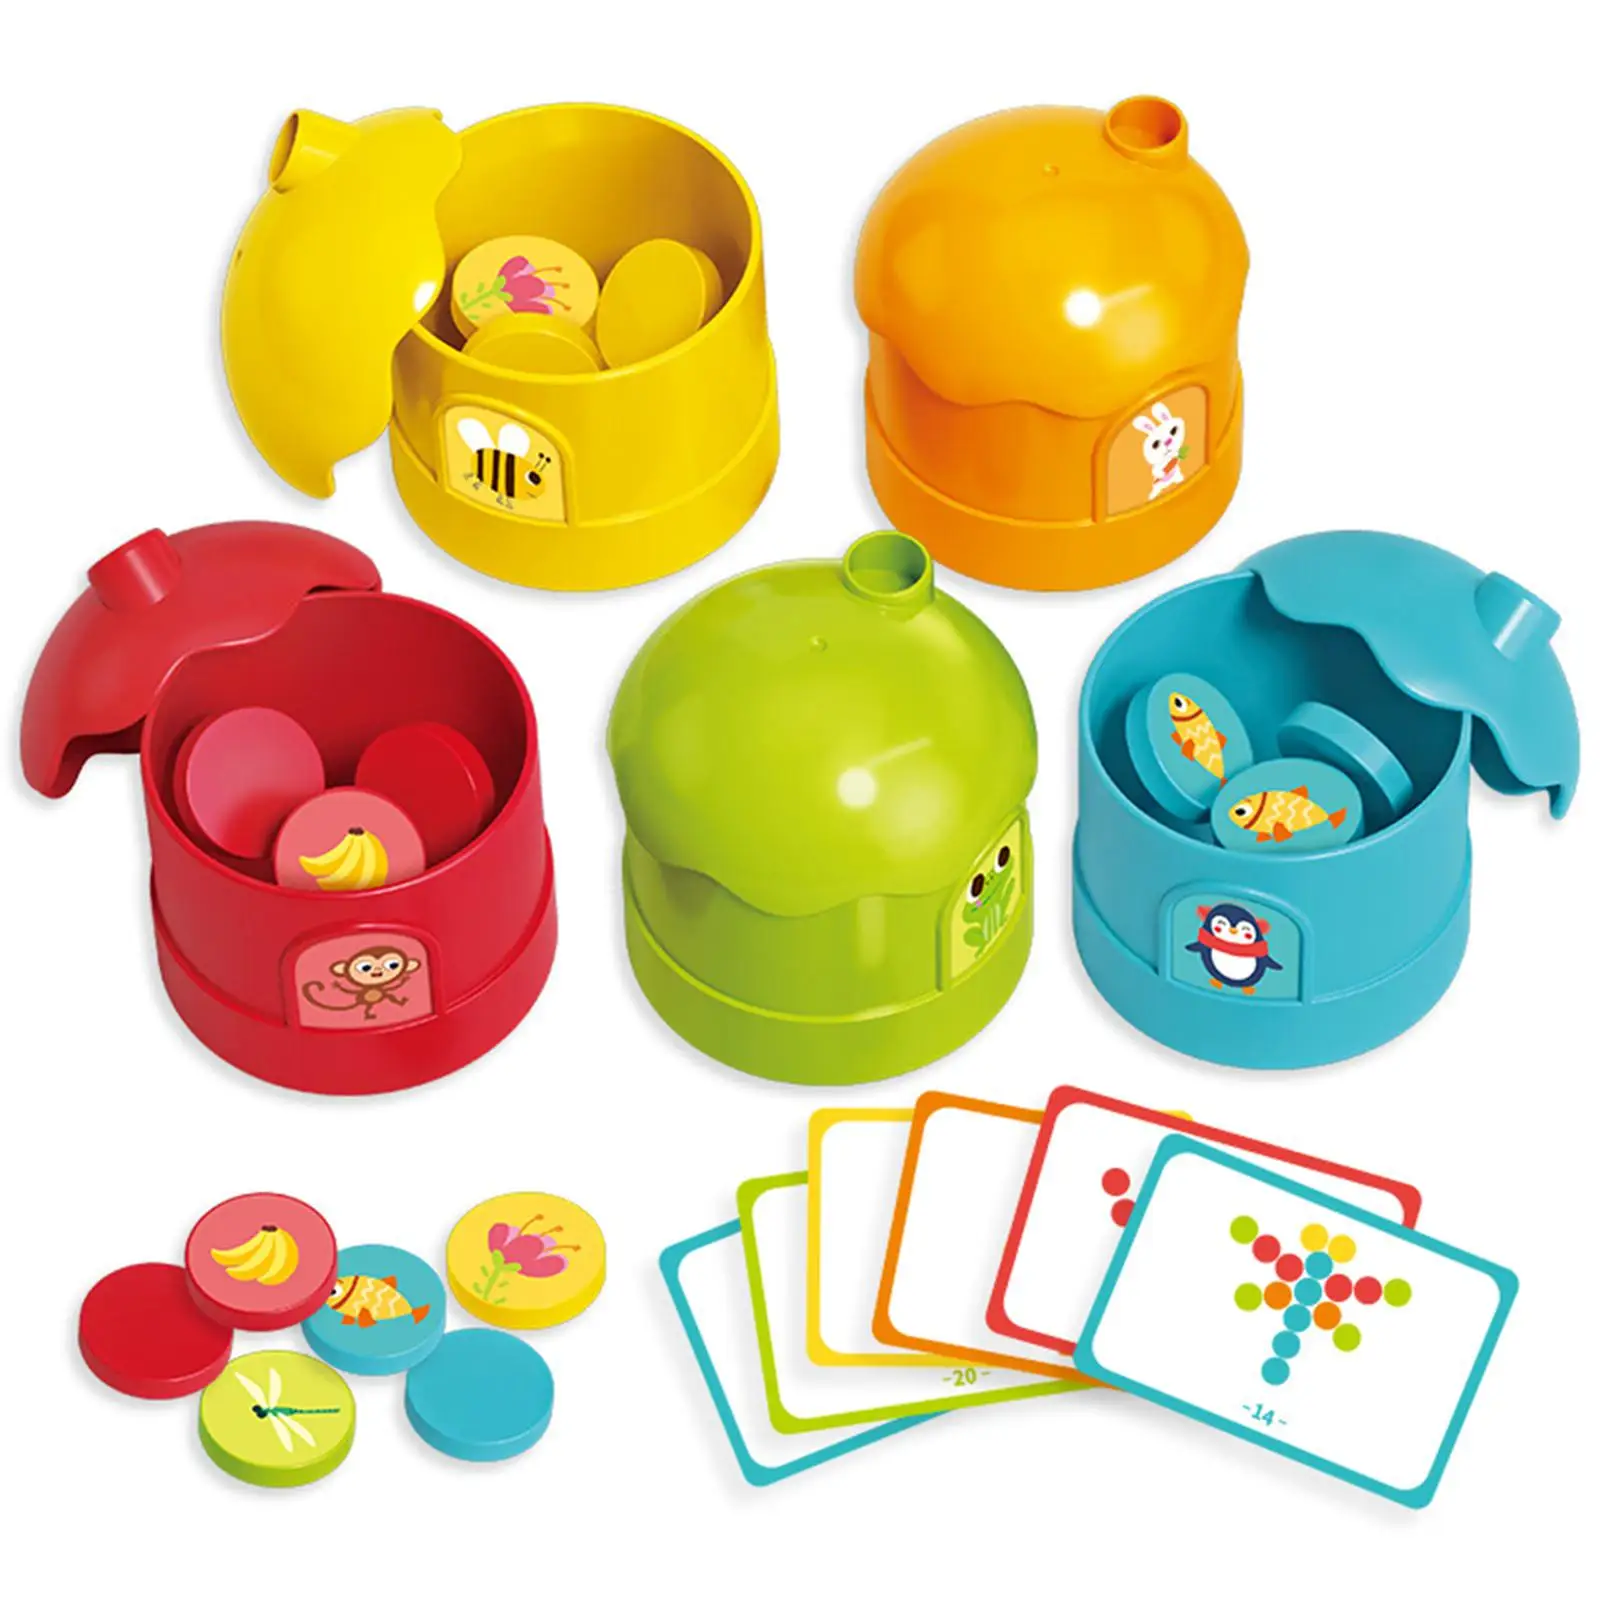 Educational Sorting Cup Classified Toys Math Teaching Aids Gift Cognitive